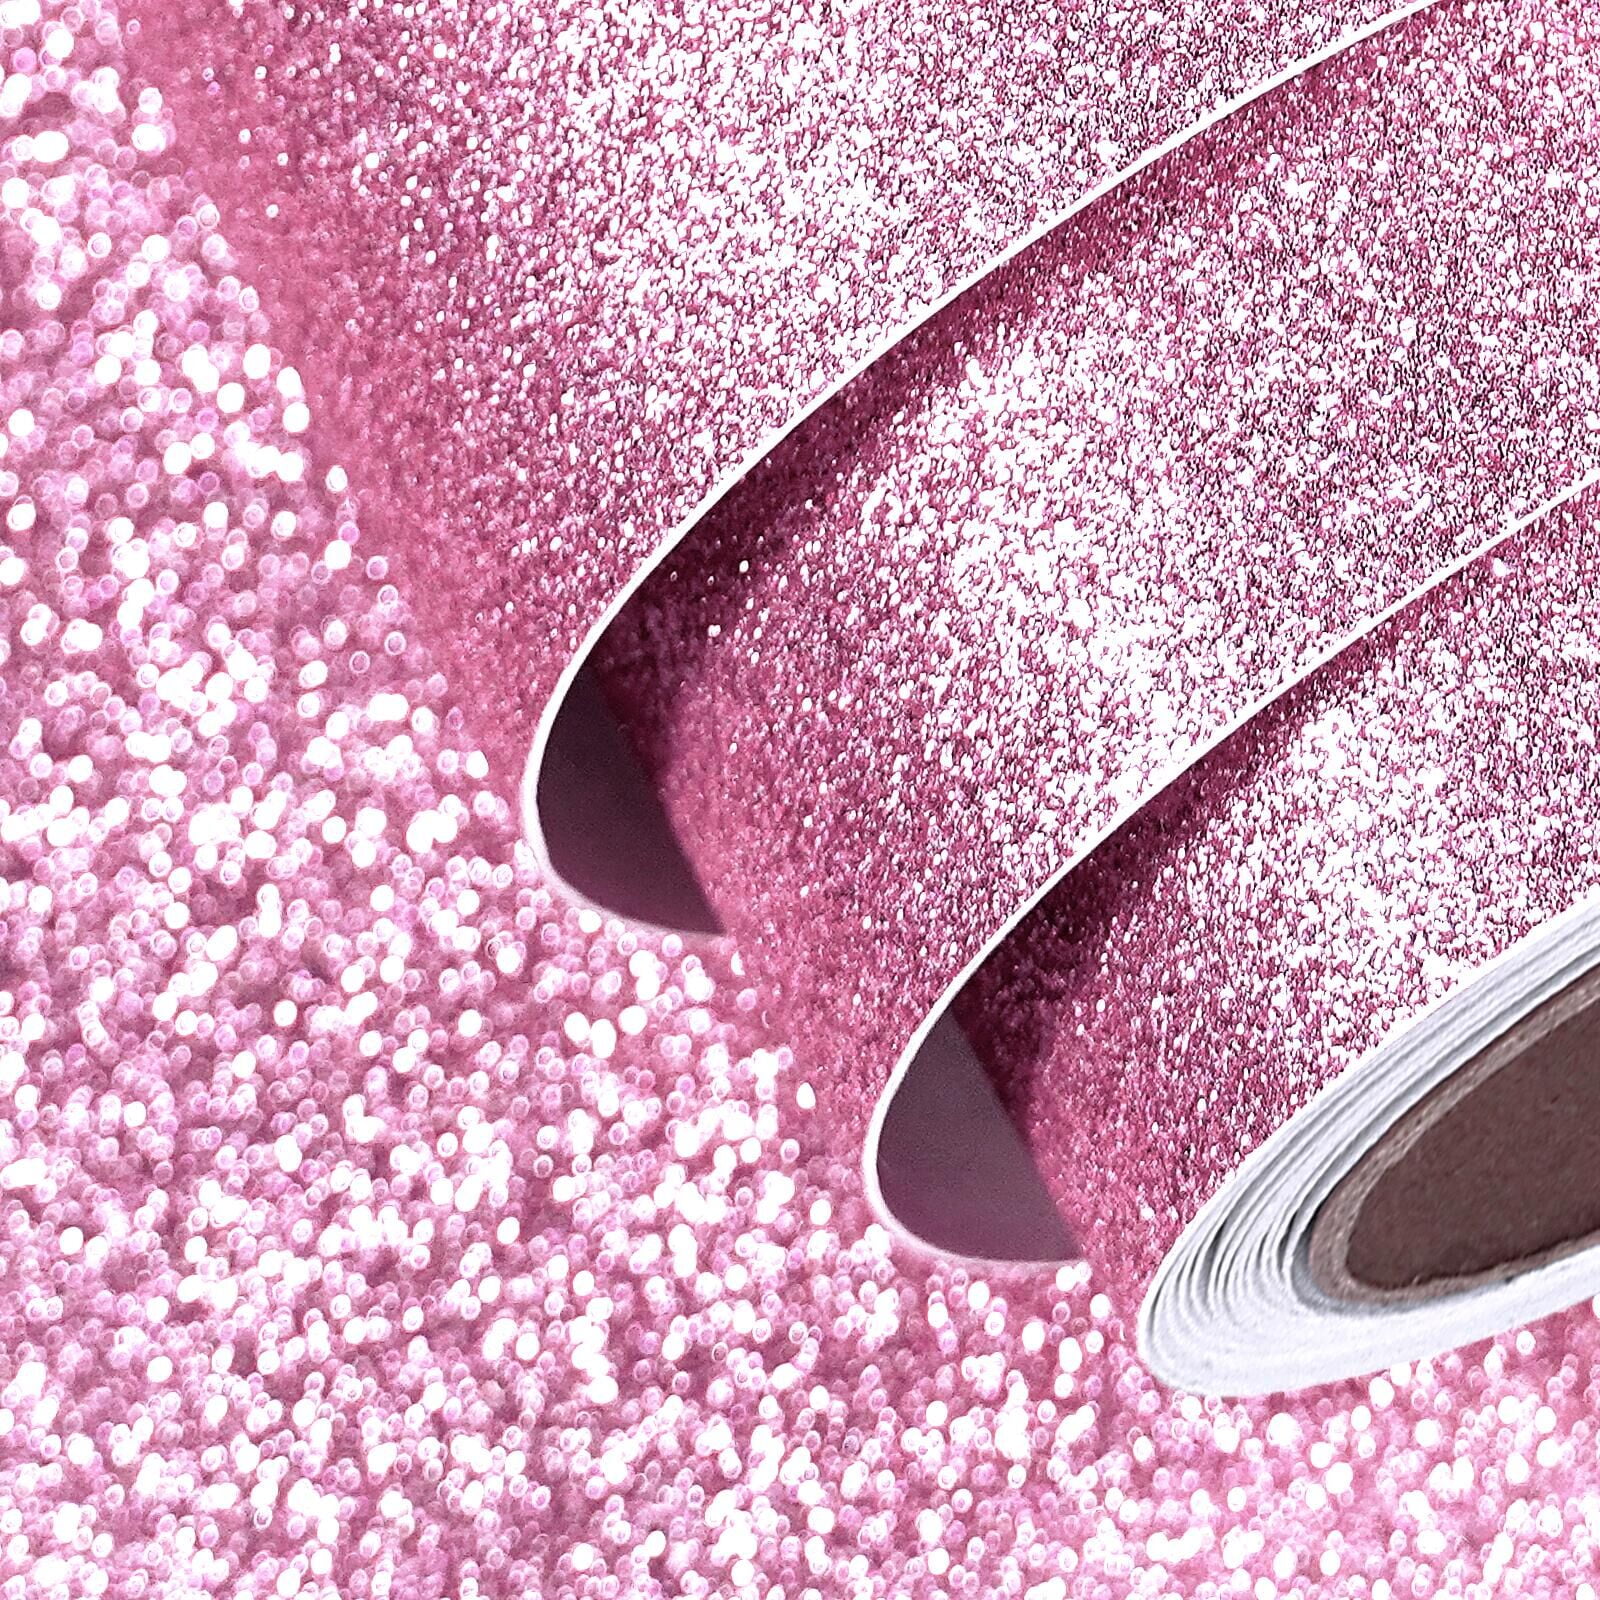 FunStick Pink Glitter Wallpaper Stick and Peel for Girls Bedroom Pink Glitter Contact Paper Decorative Fabric Pink Wallpaper Self Adhesive for